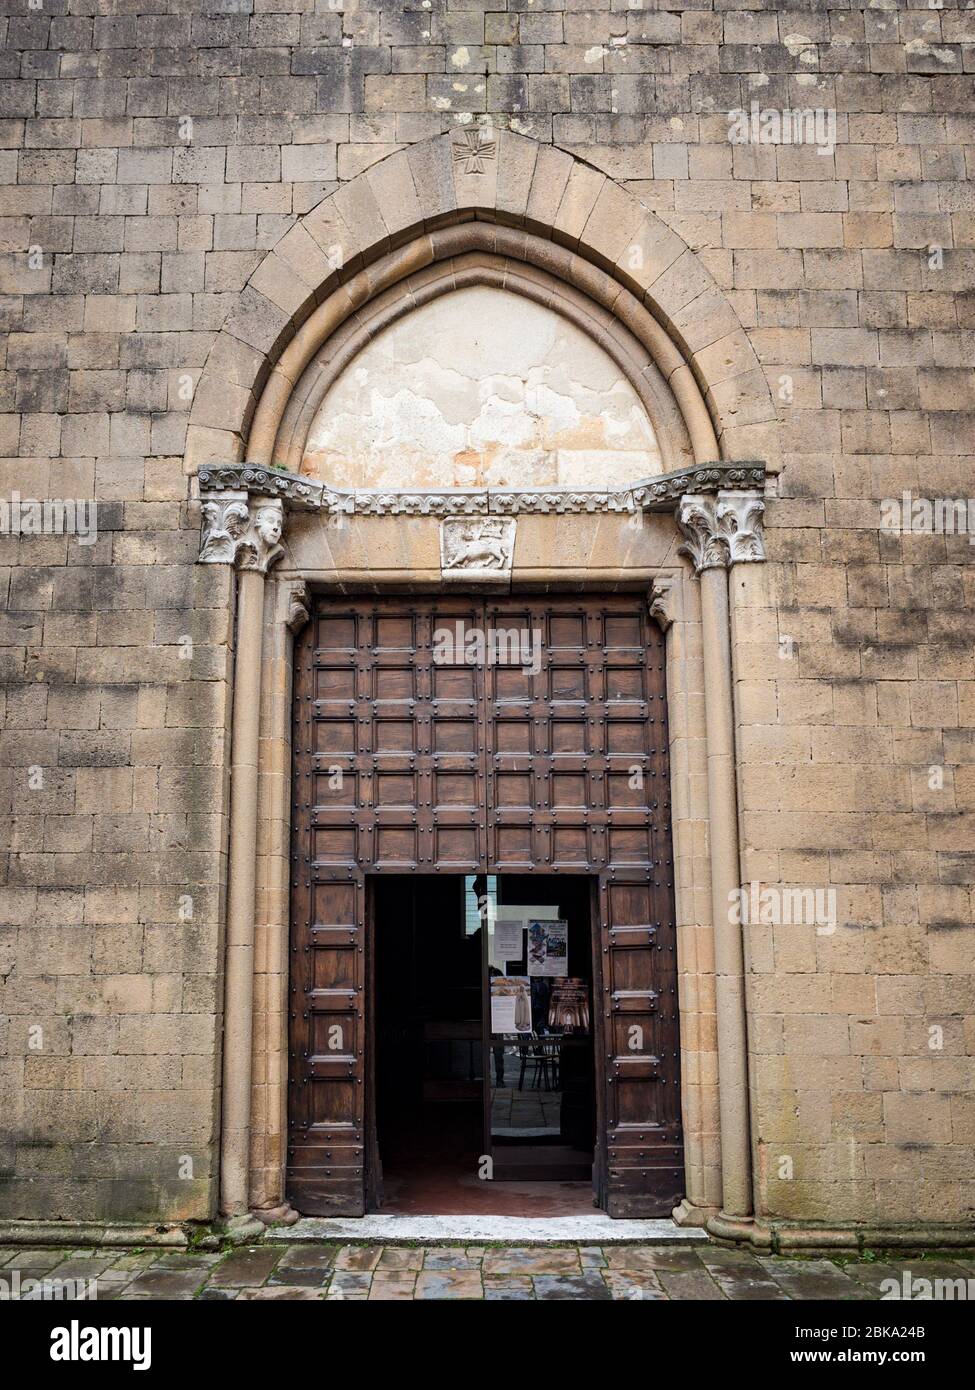 Imposing portal from the church of San Francesco in Pienza, Italy, dating back to 1200. Stock Photo